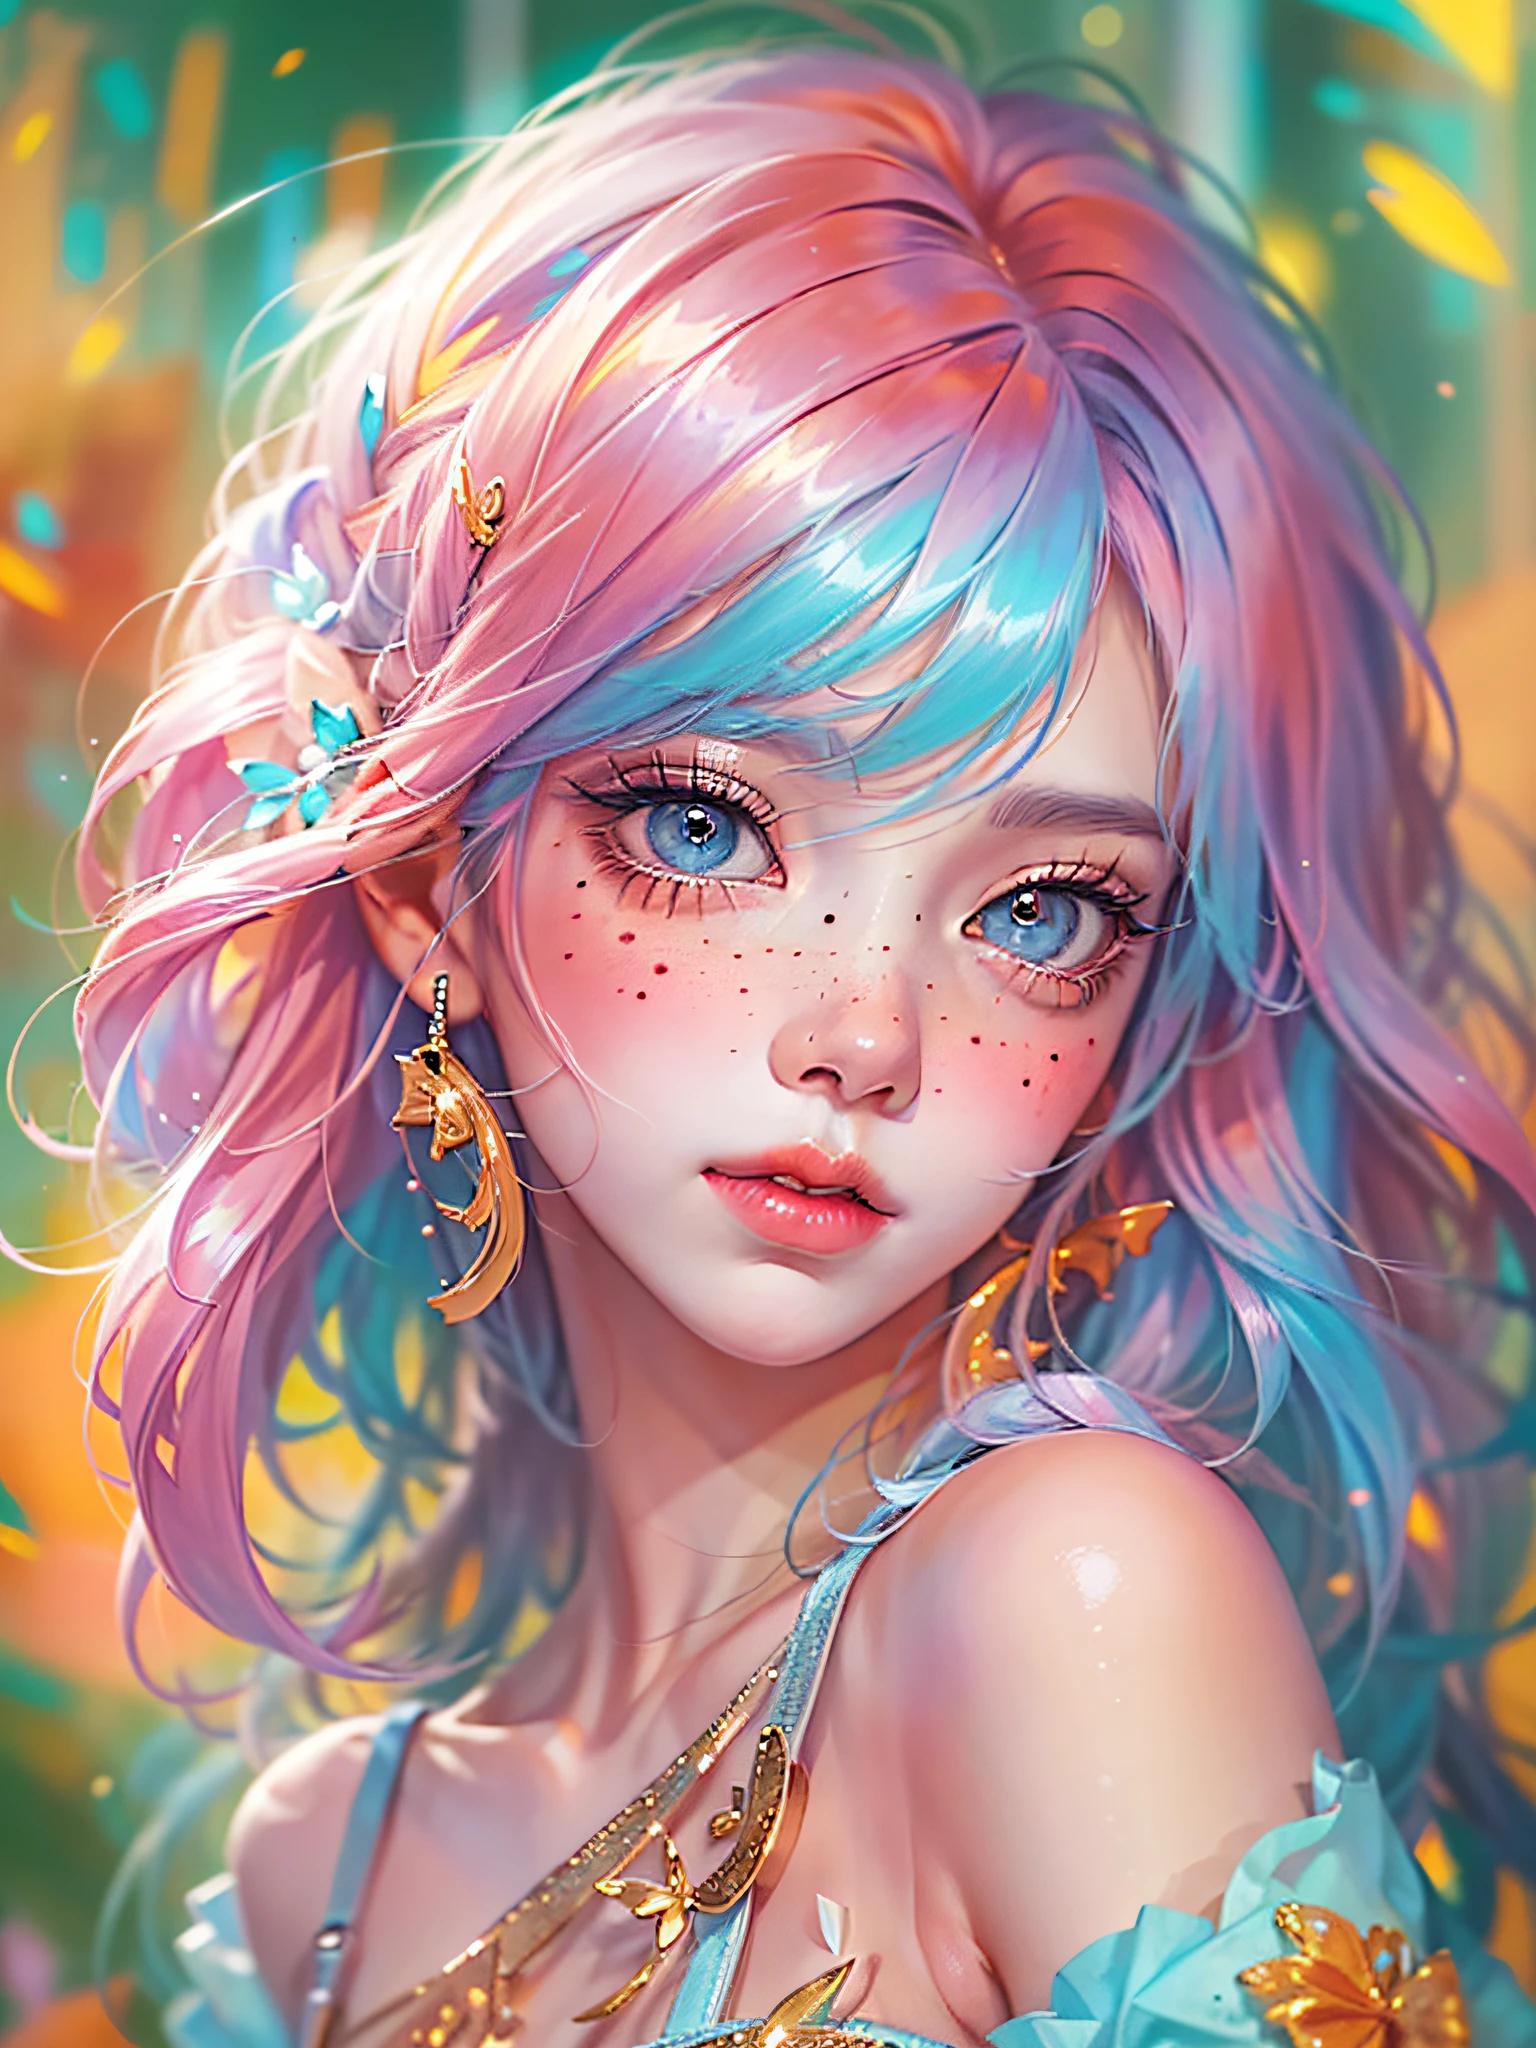 ((ultra detailed)),((Bright eyes)), (Detailed eyes) , 8k, blink blink, (The Little Faux Freckles Makeupgirl), ((realistic skin)), ((focus detailed 2 straps on the shoulders of dress)) , ((shiny facial skin)), with colorful hair and a colorful dress, rossdraws pastel vibrant, rossdraws cartoon vibrant, style anime 8k, beautiful portrait, artgerm colorful!!!, ! dream artgerm, beautiful anime girl, styled digital art, art wallpaper 8k, digital art, extremely detailed artgerm,